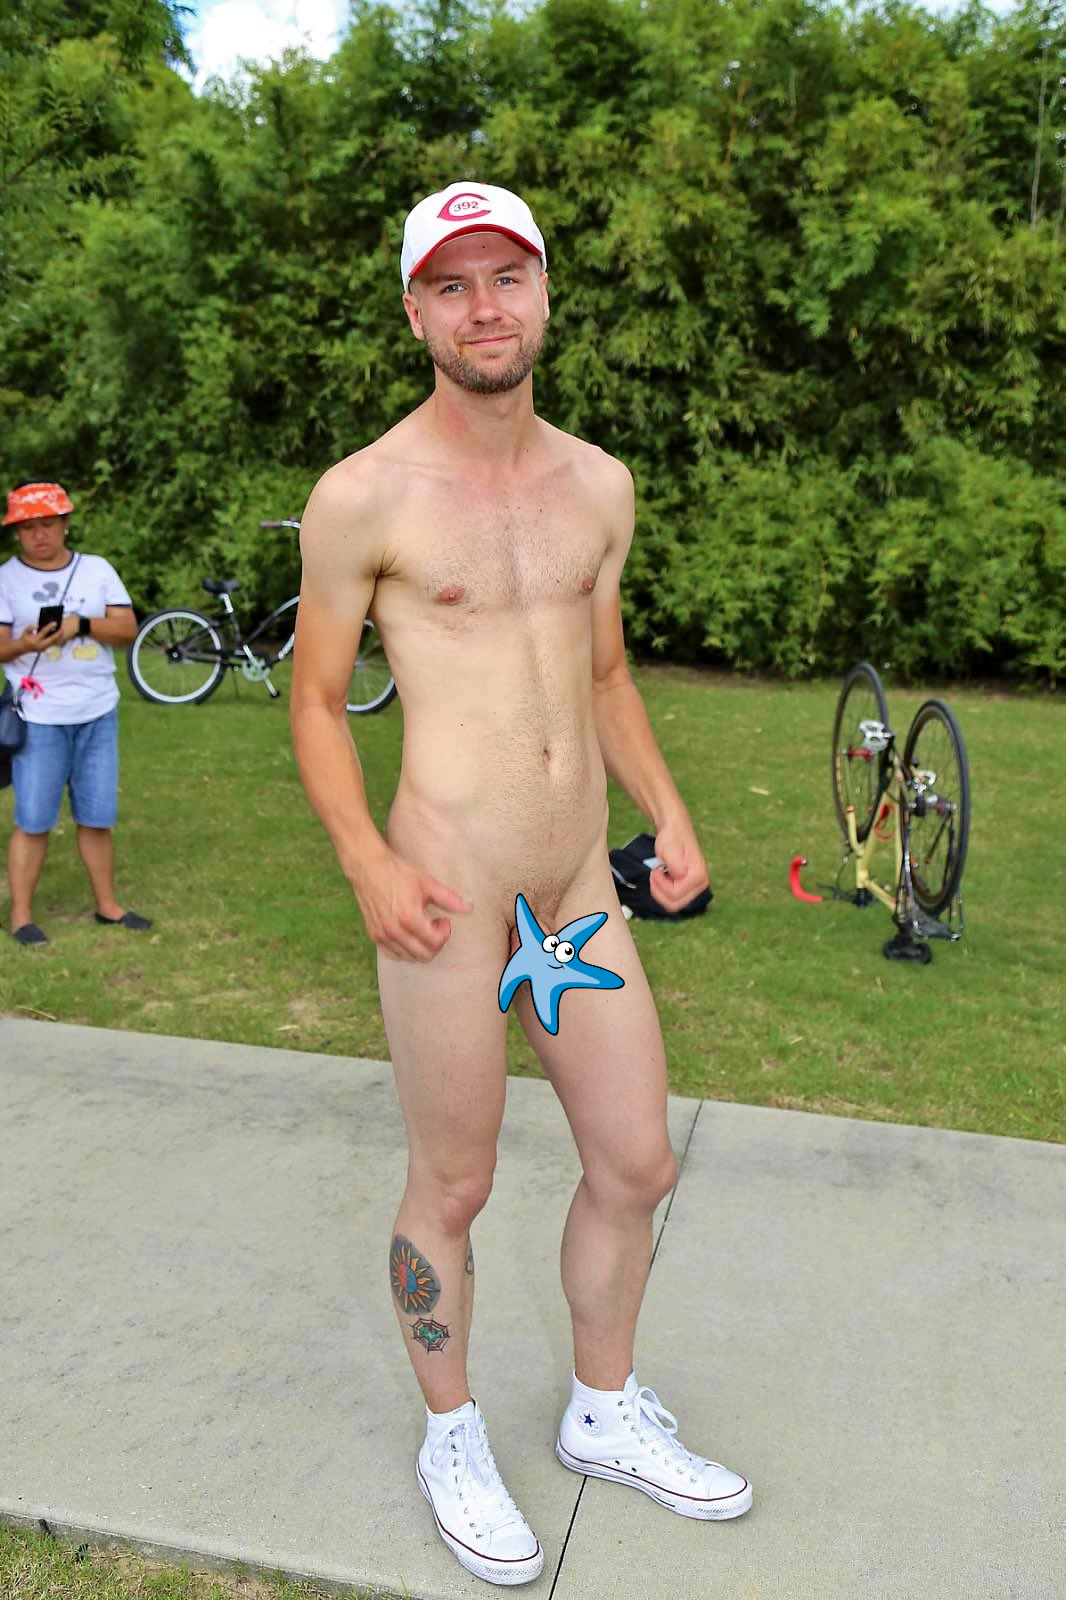 Nude man in a park